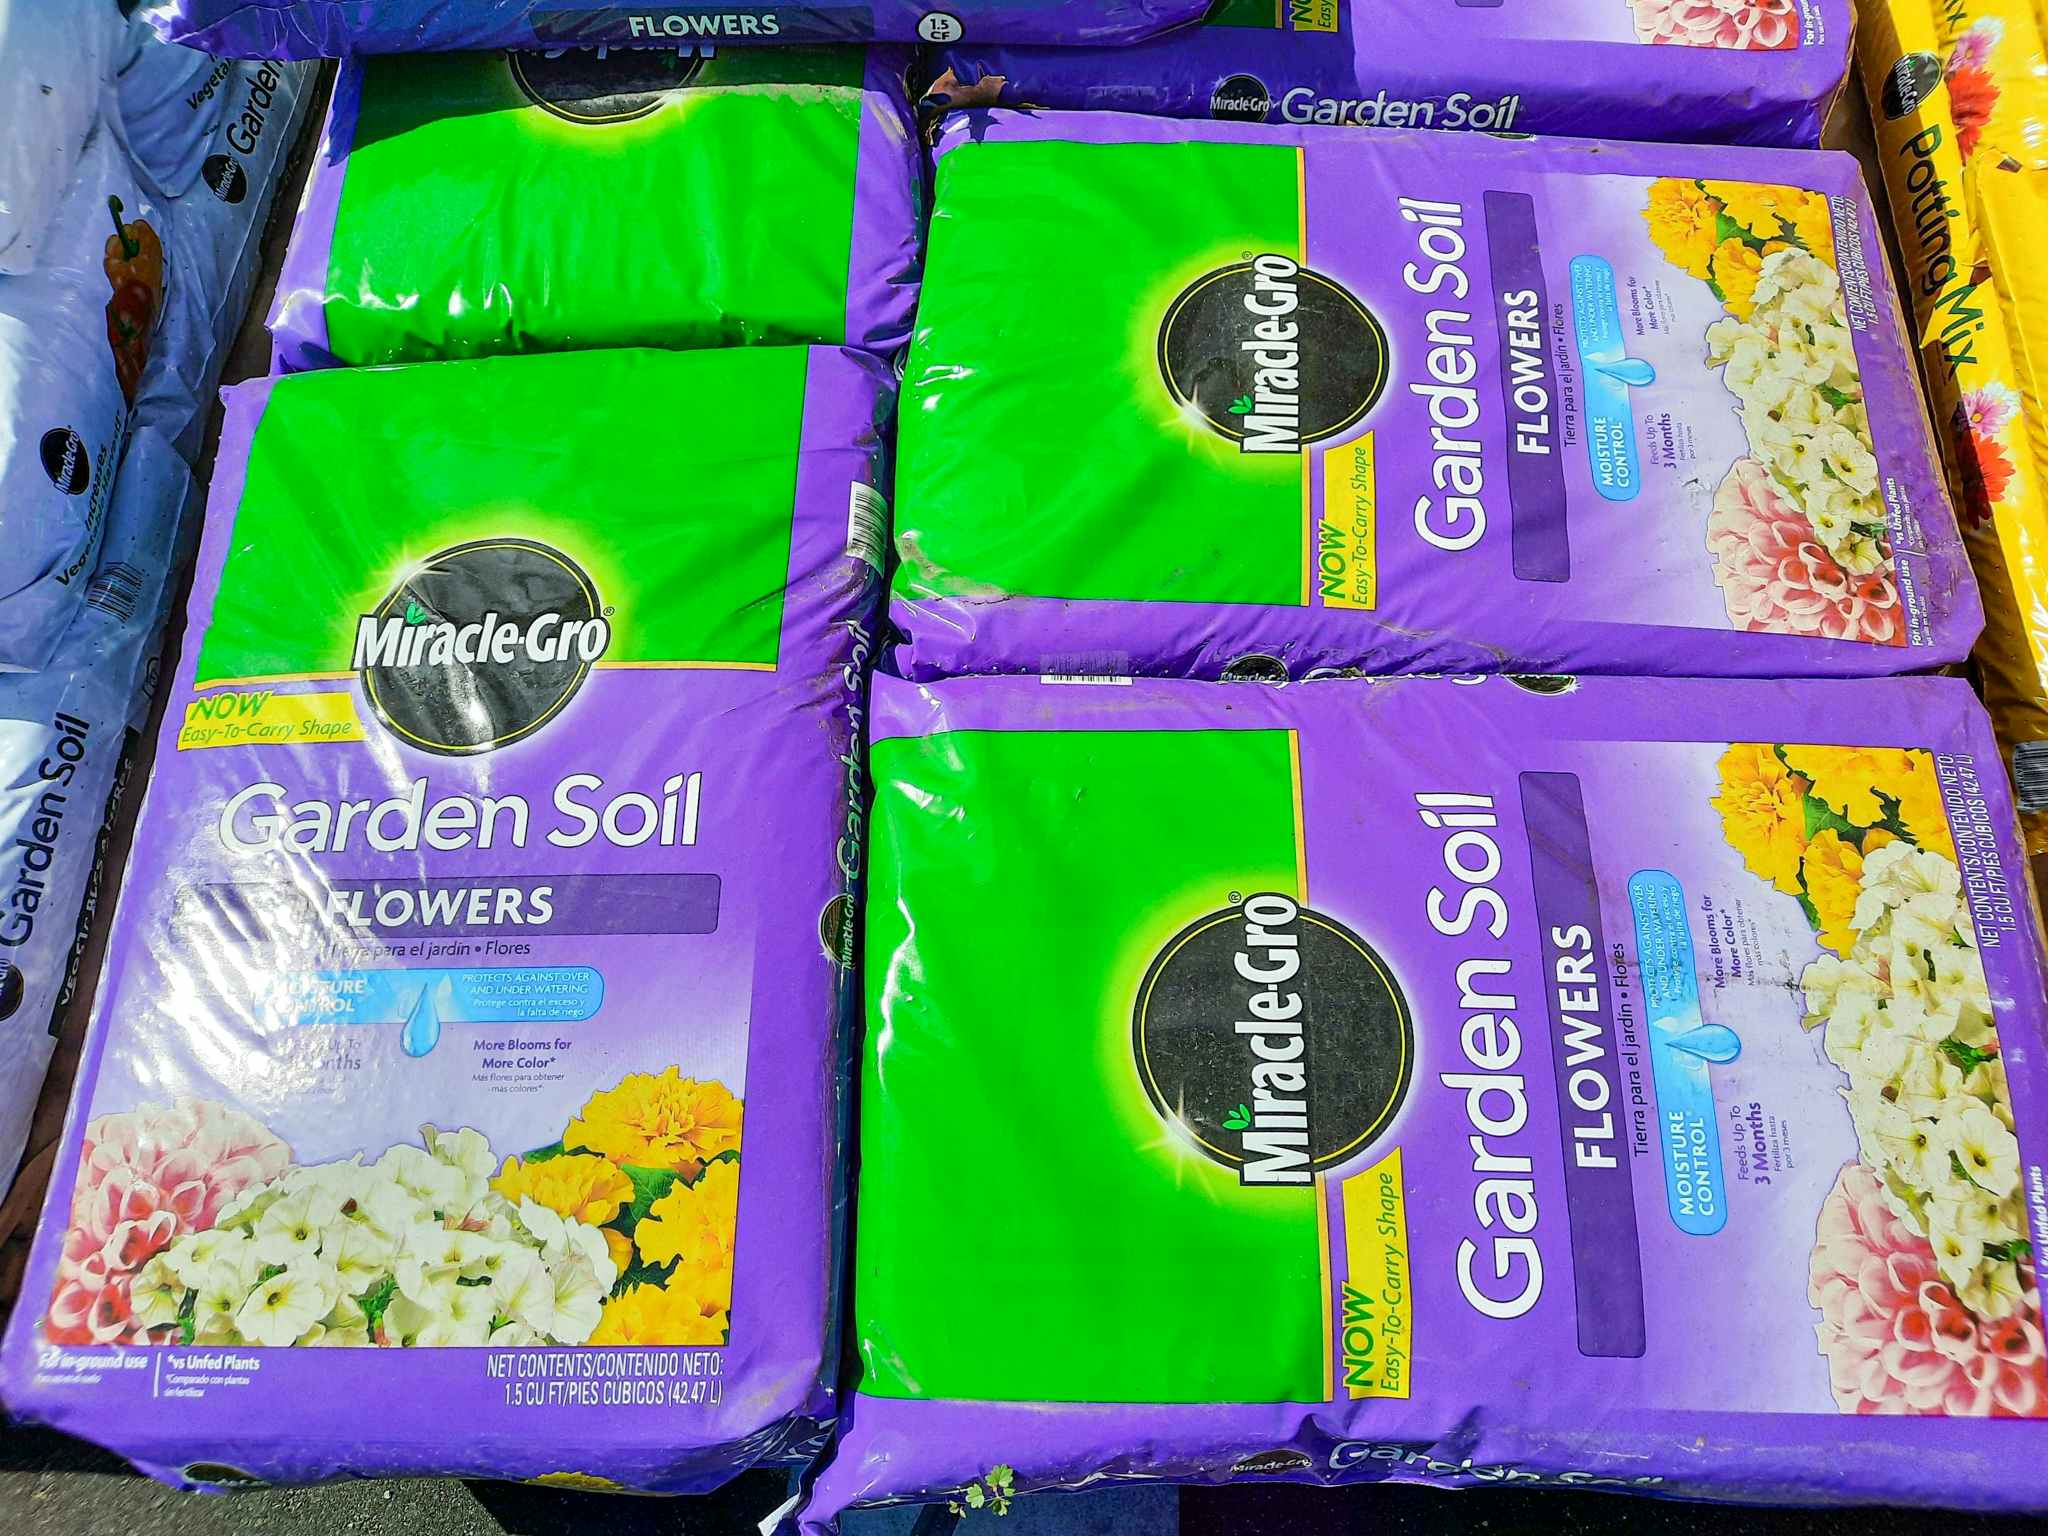 Miracle Gro Garden Soil Flowers at Ace Hardware